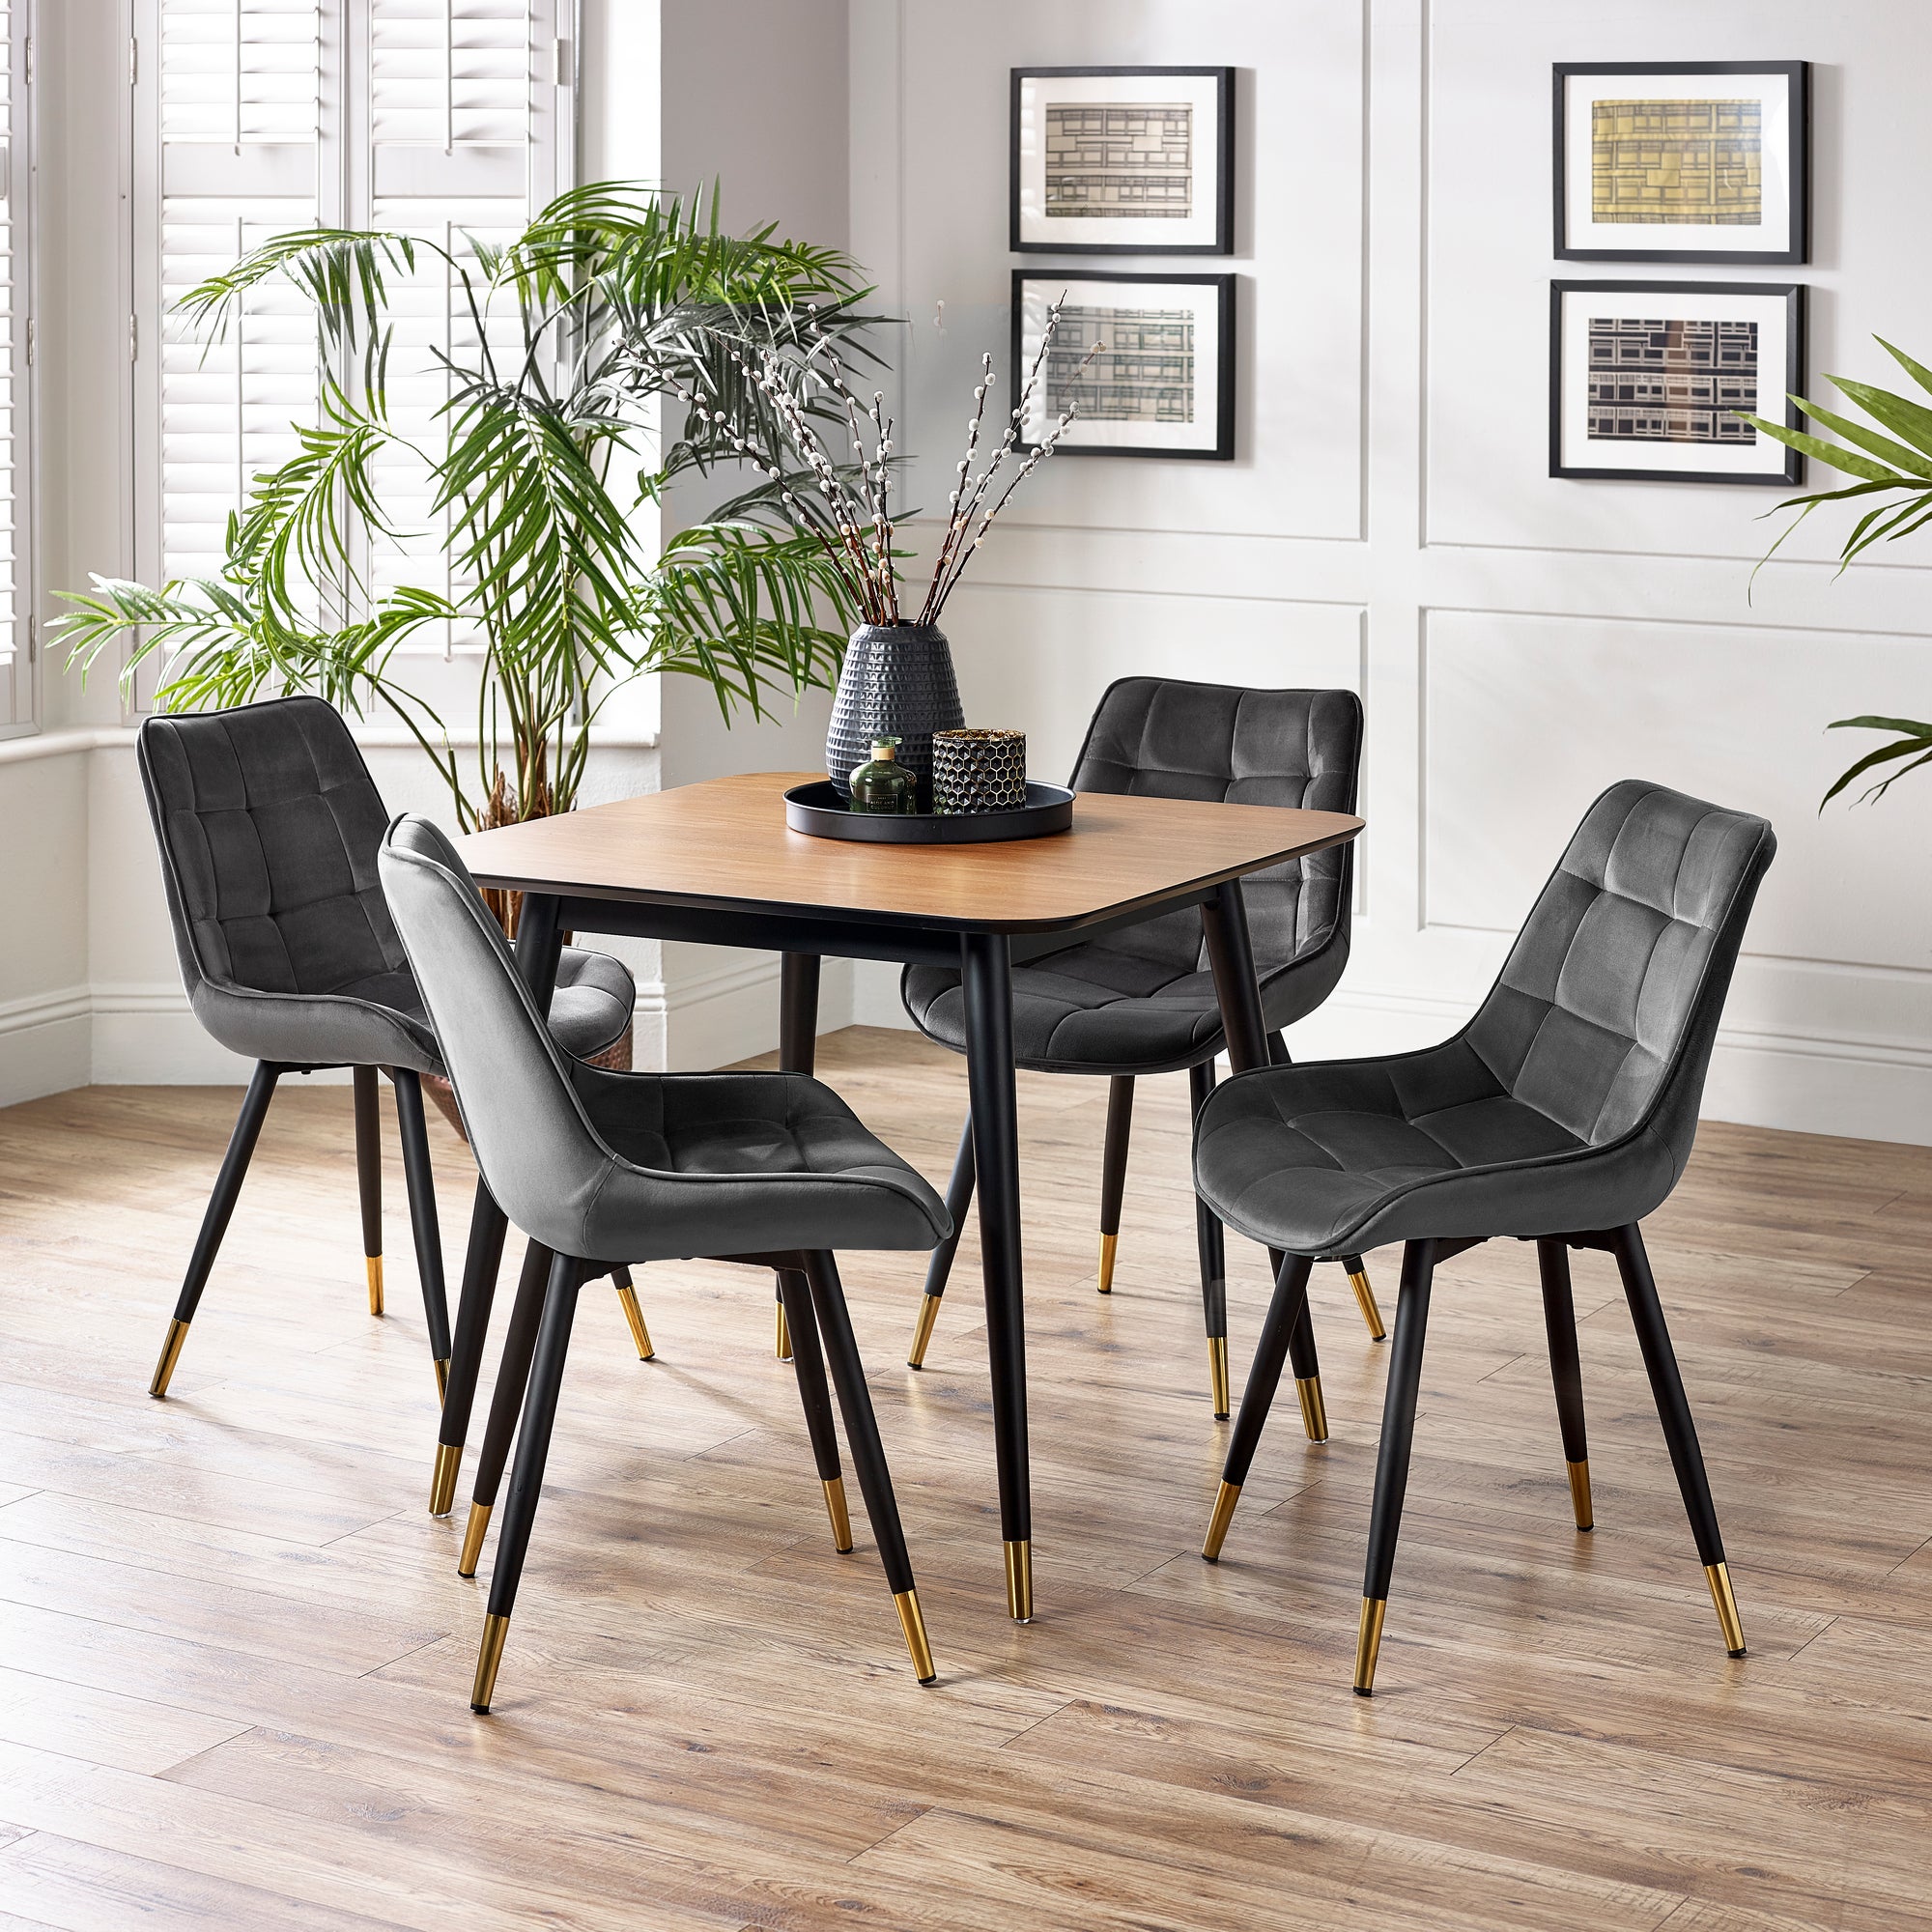 Photos - Dining Table Julian Bowen Findlay 4 Seater Square , Beech Wood Brown 